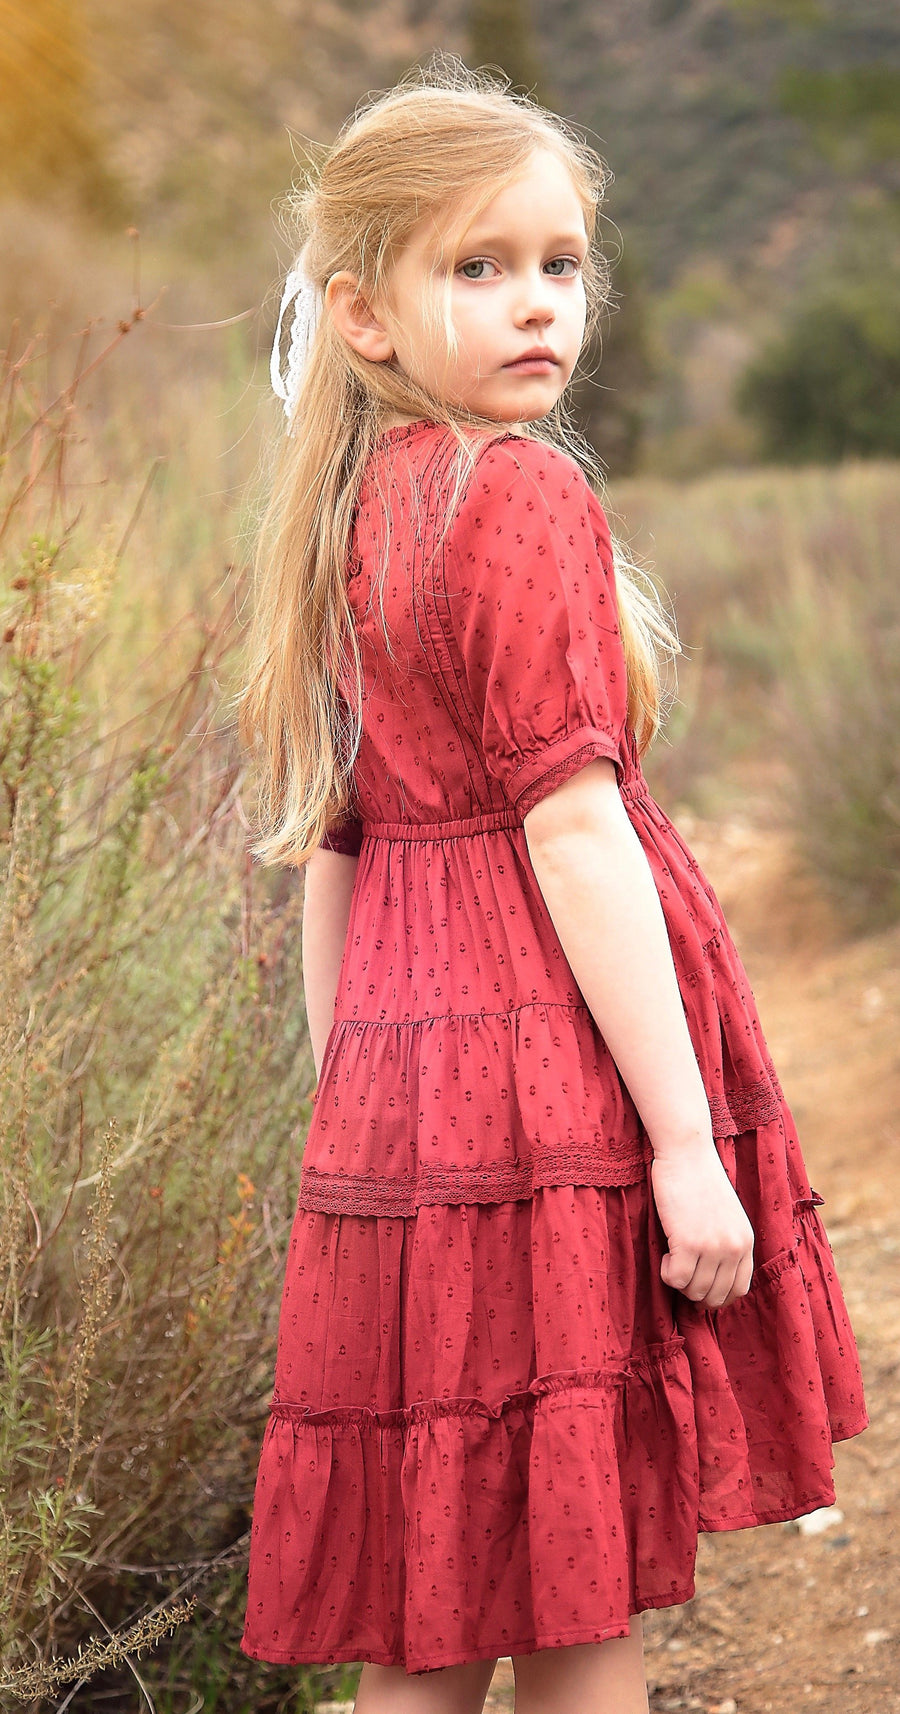 dreamy rosalynn dress - Pink and Brown Boutique